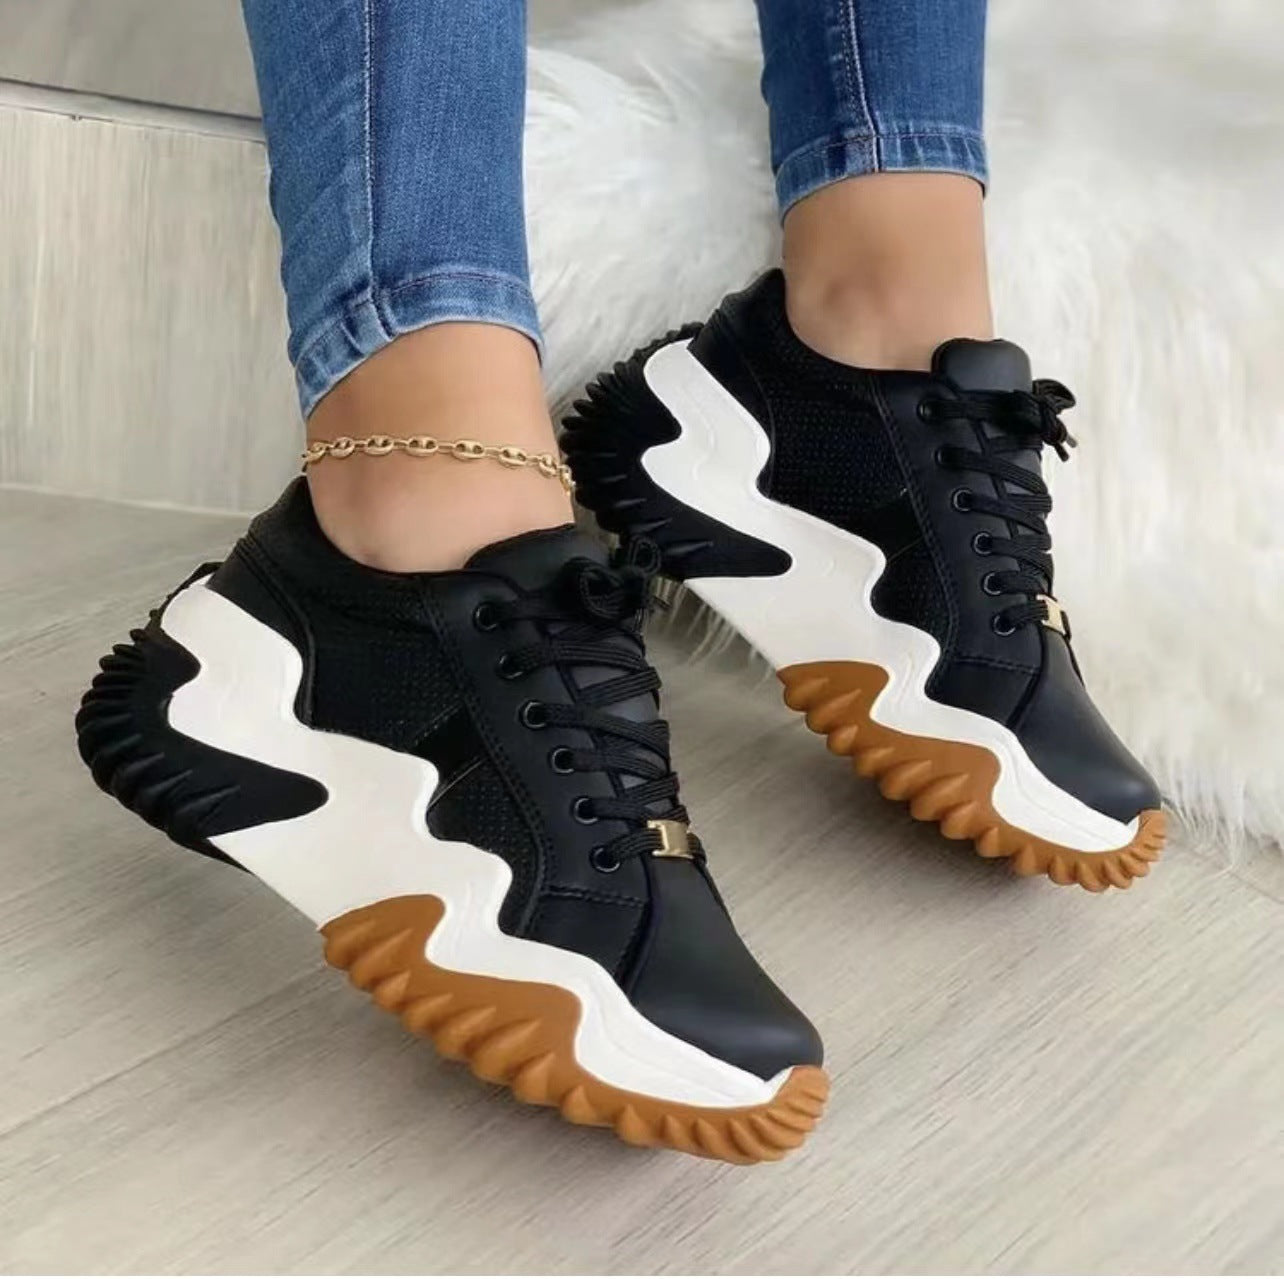 Lovemi -  Women Shoes Lace-up Sports Sneakers